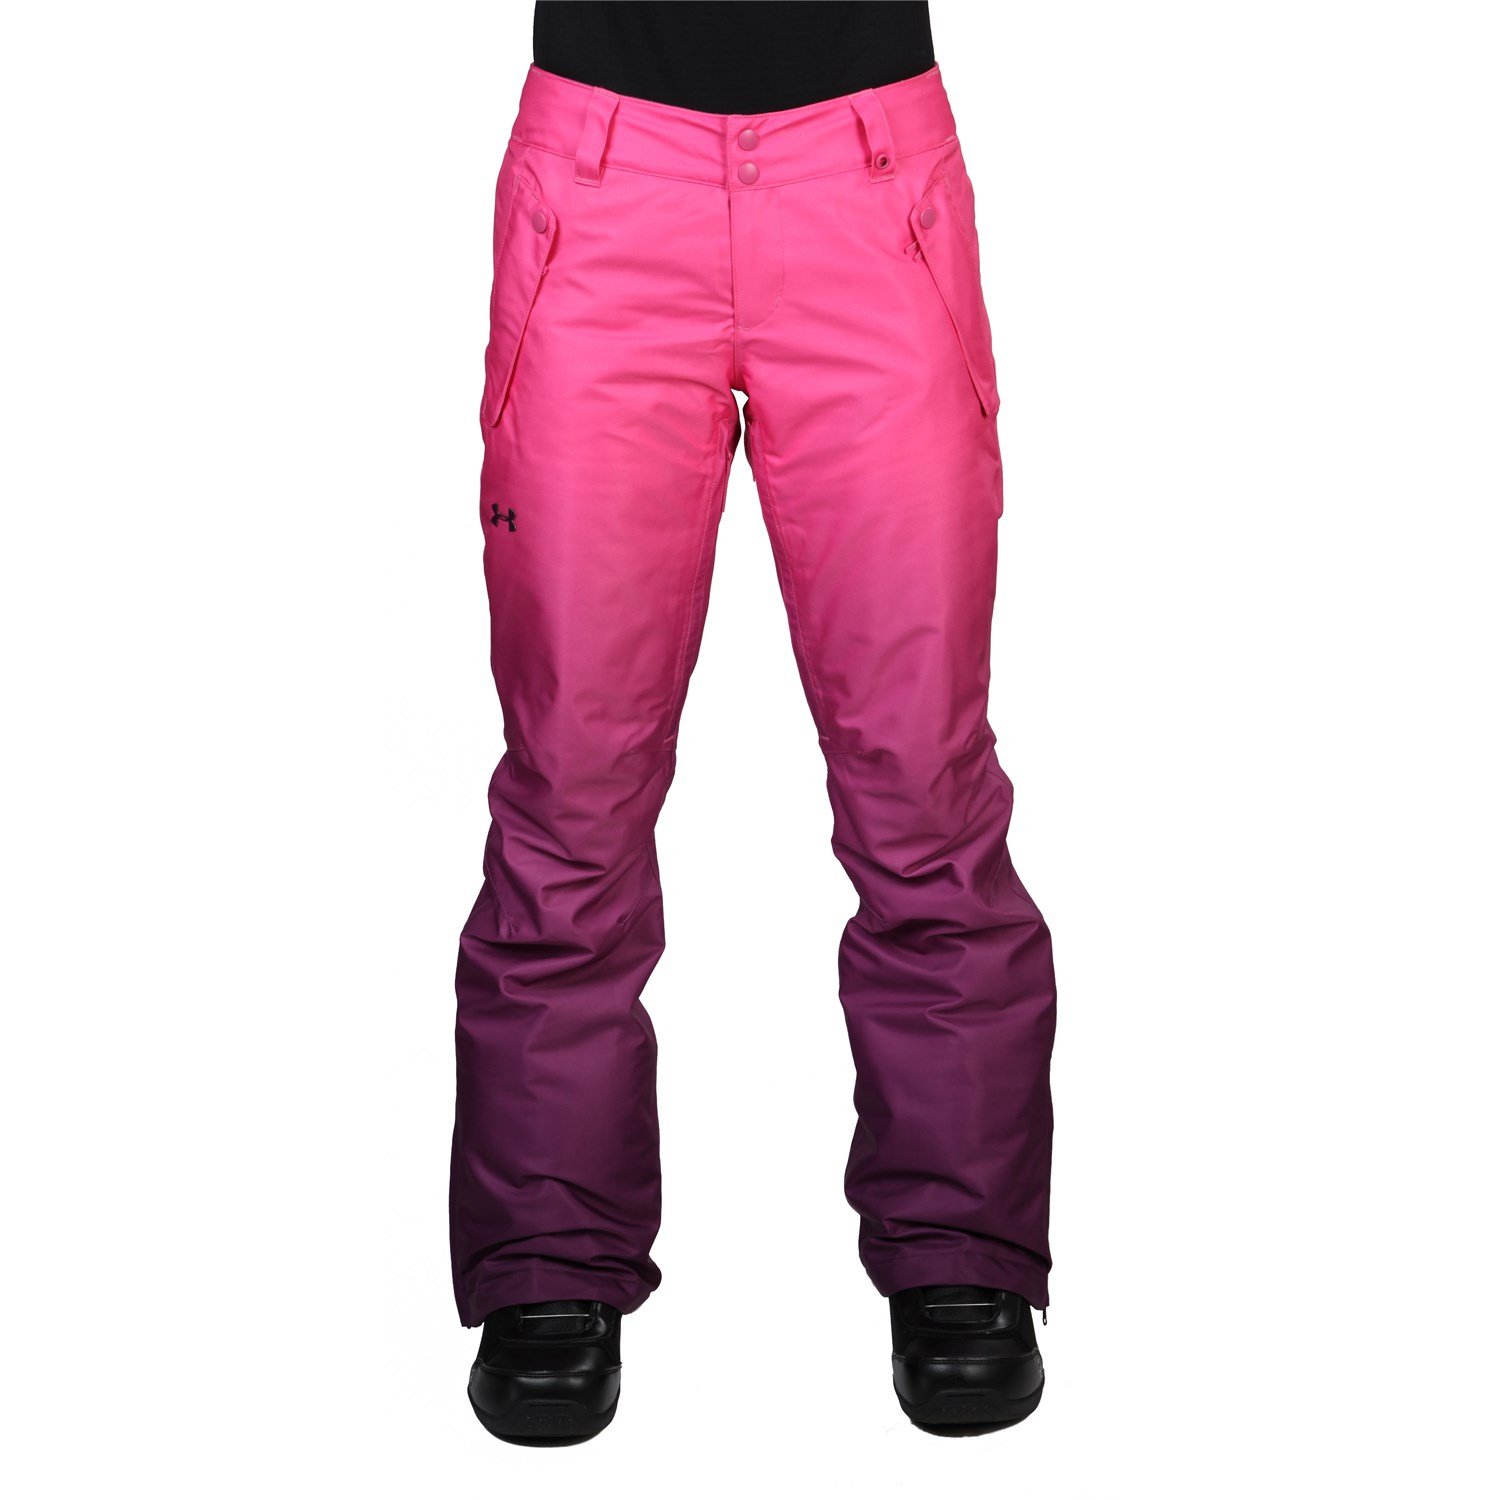 Under Armour Coldgear Infrared Fader Pants - Women's